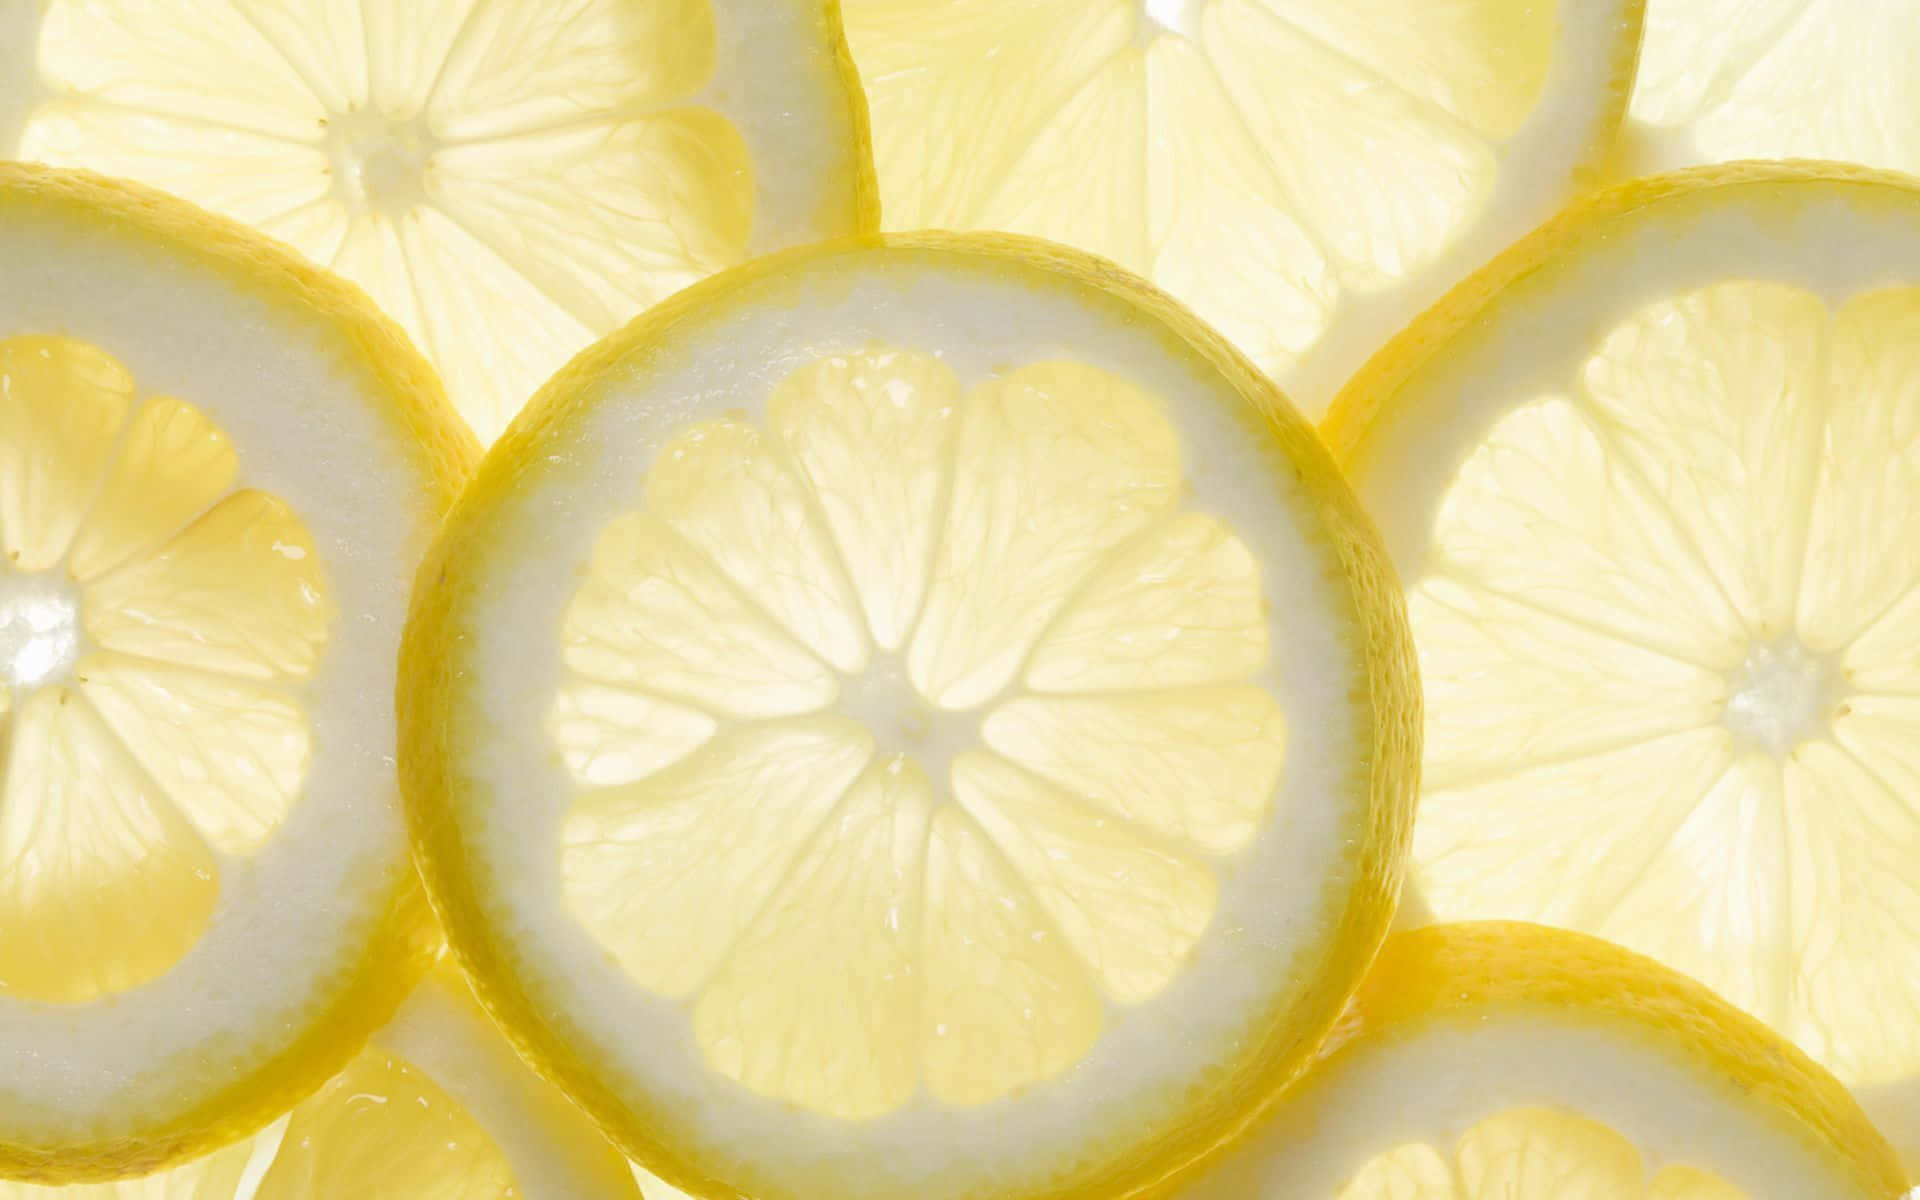 Lemon Wallpaper Images  Free Photos PNG Stickers Wallpapers   Backgrounds  rawpixel